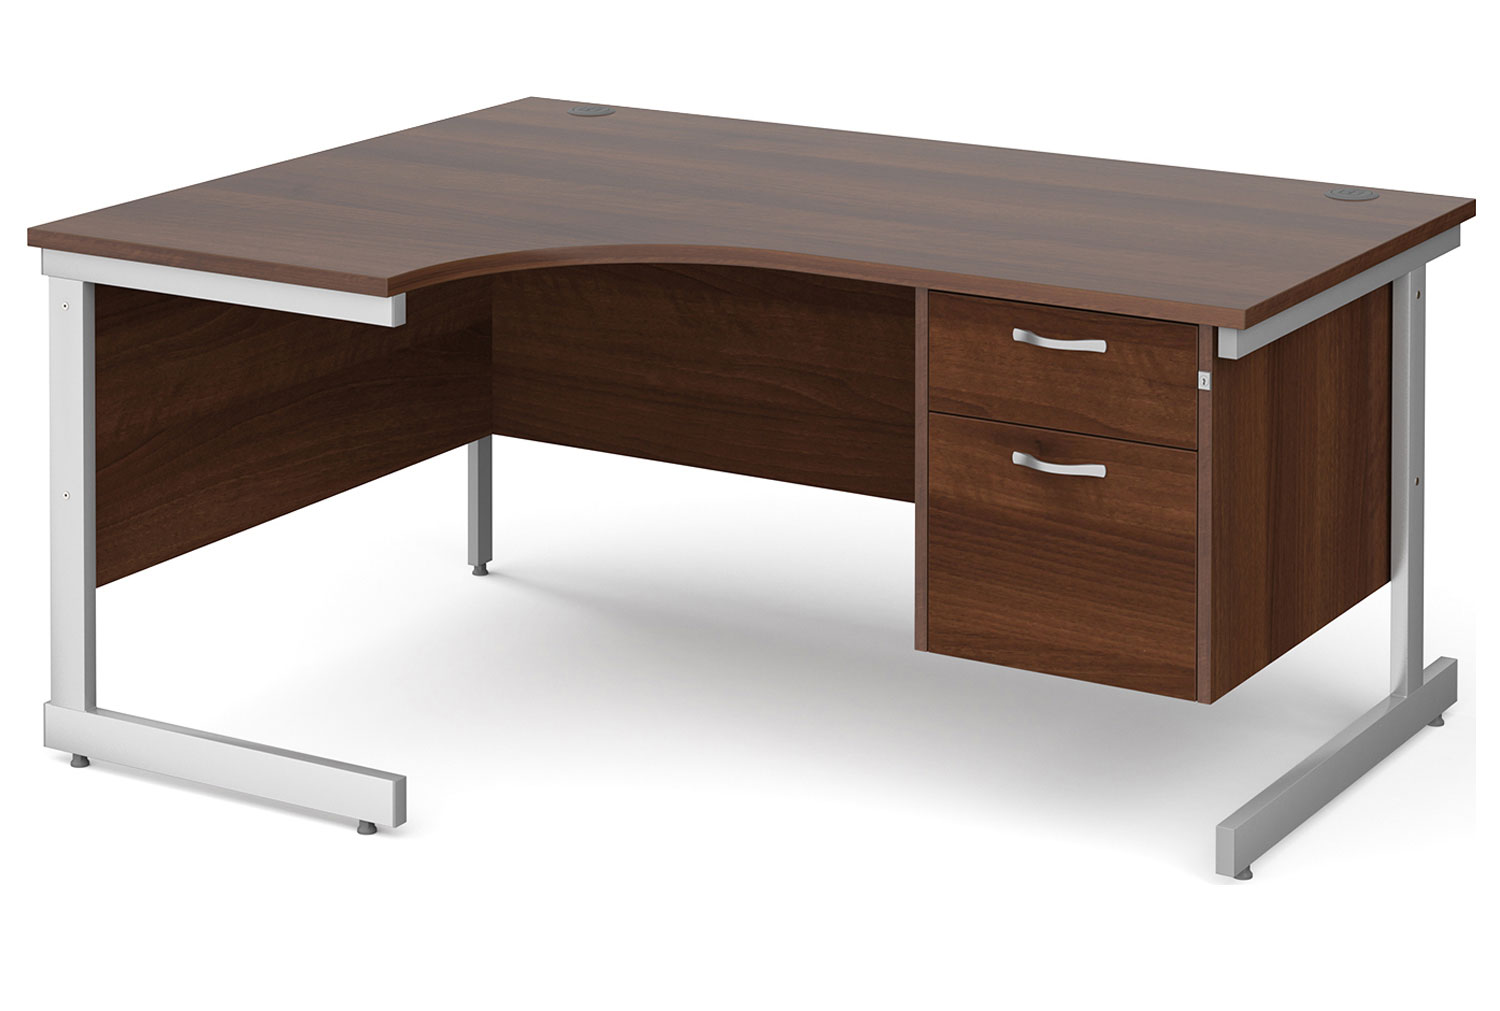 Thrifty Next-Day Left Hand Ergonomic Office Desk 2 Drawers Walnut, 160wx120/80dx73h (cm), Express Delivery